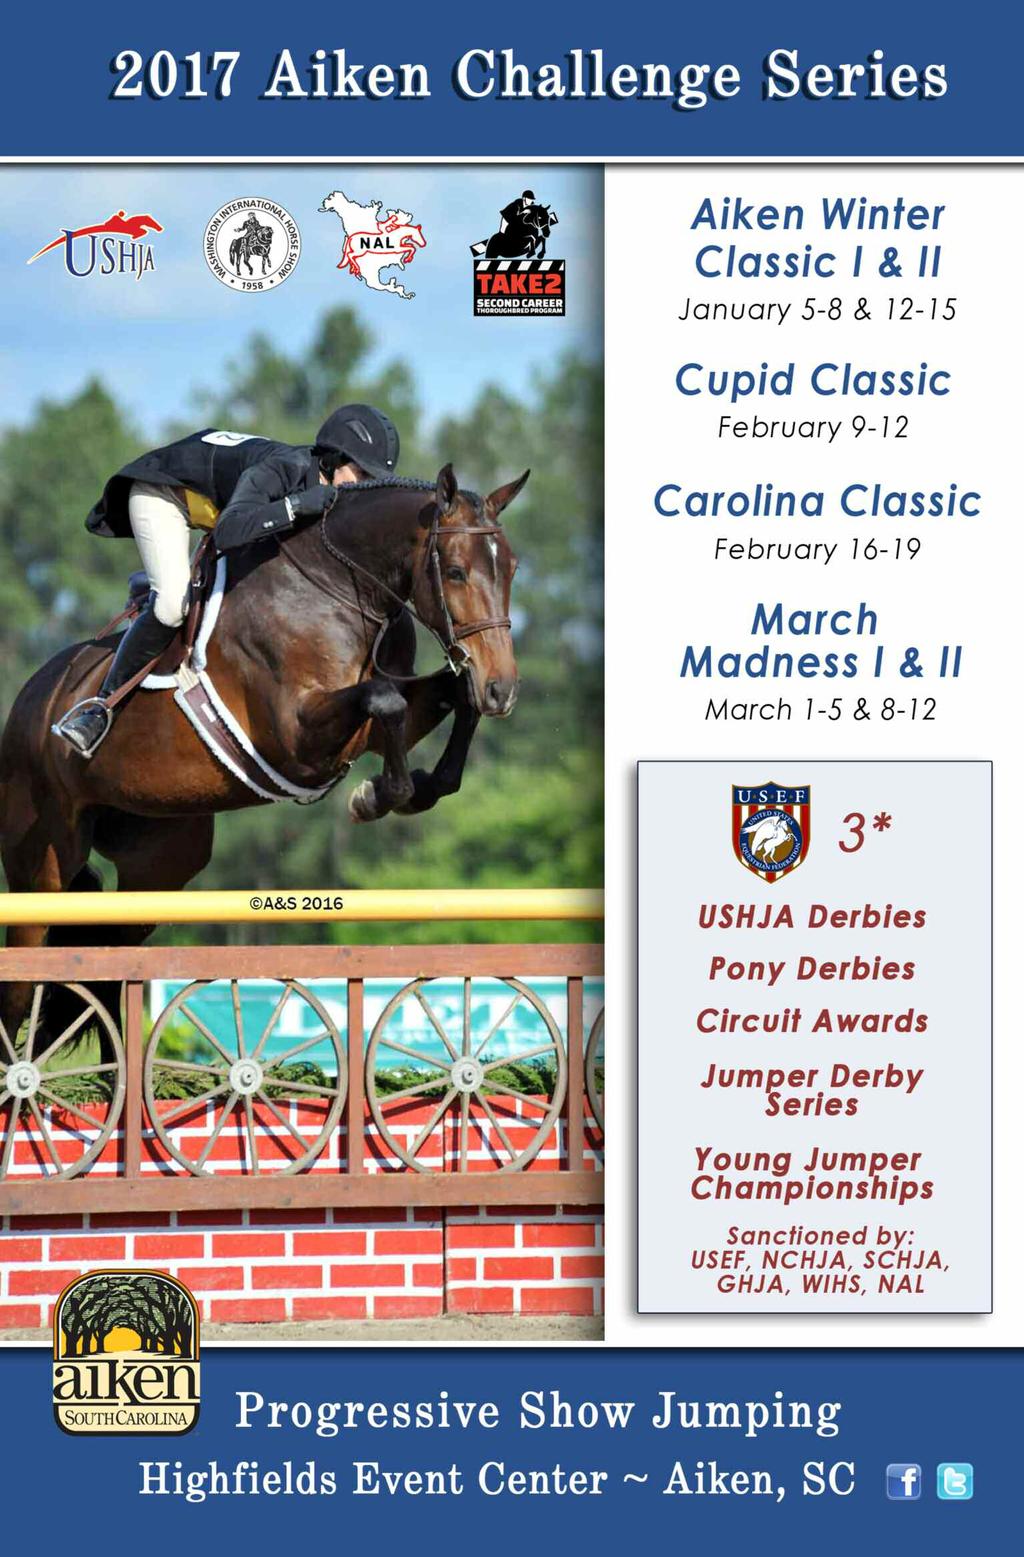 Prize List subject to change after the USEF/USHJA Annual Convention in December Visit www.psjshows.com for the most up-to-date information!